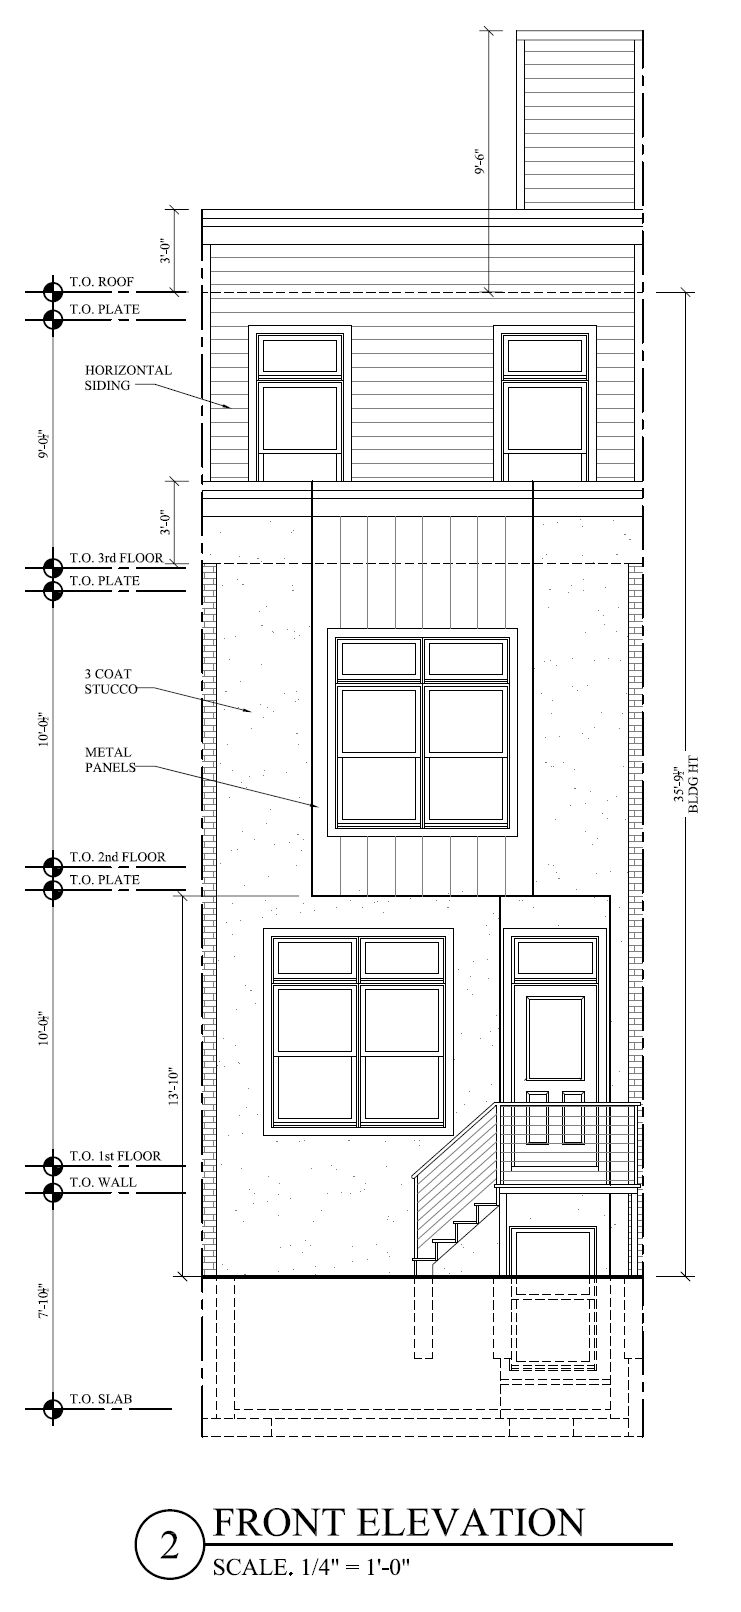 109 Watkins Street. Building elevation. Credit: MC Architectural via the City of Philadelphia Department of Planning and Development